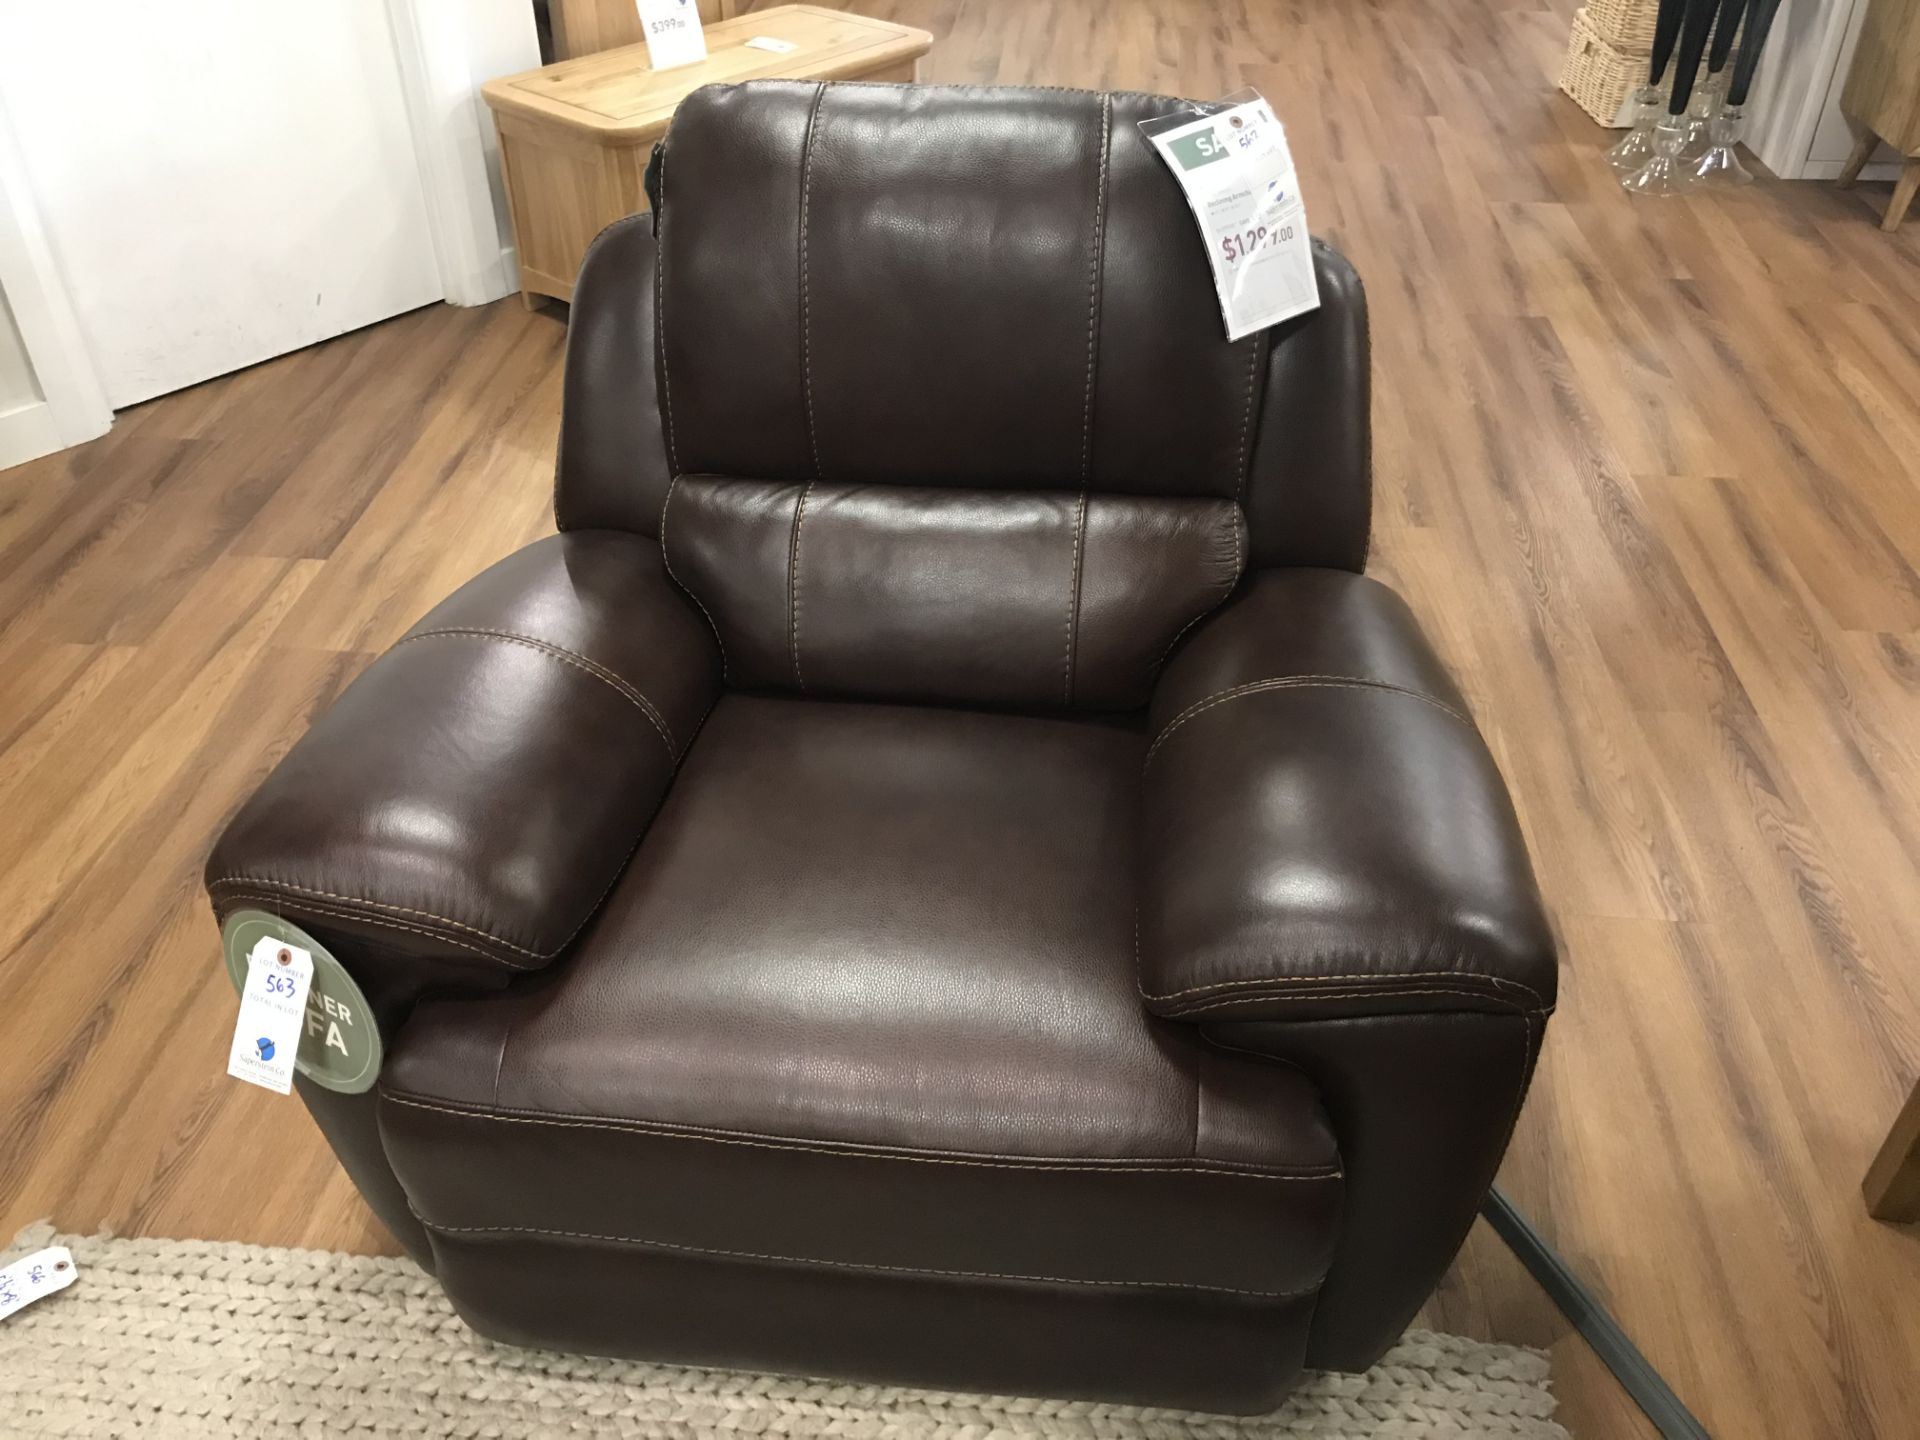 Reclining Armchair (Finley)See Picture For Dimensions and Product Info